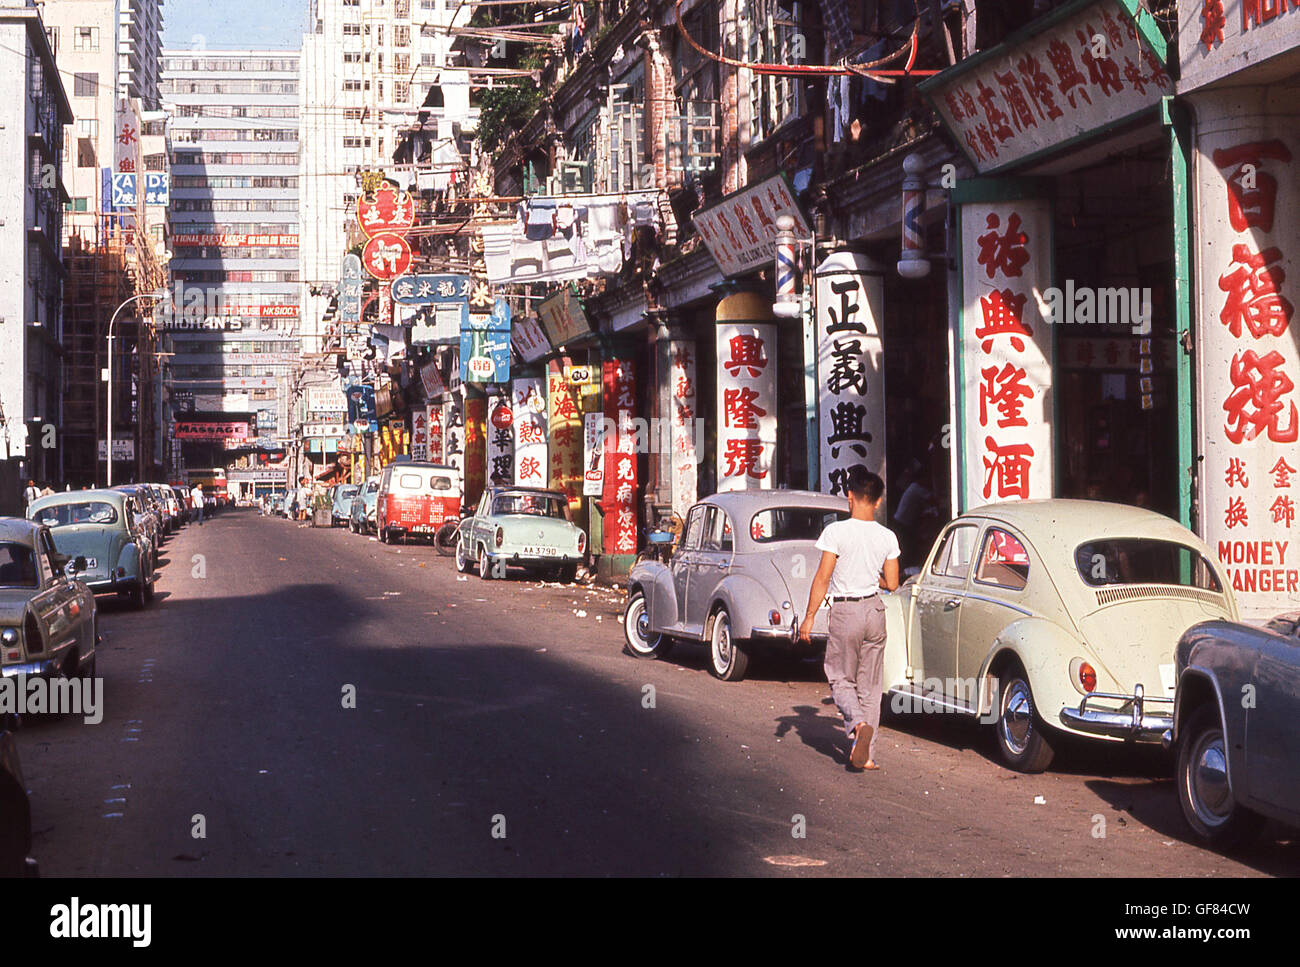 1960s, historical, daytime and a view of a side street in the old town of Hong Kong, with chinese characters covering the concrete posts supporting the street buildings. Cars of the era are parked alongside. Stock Photo